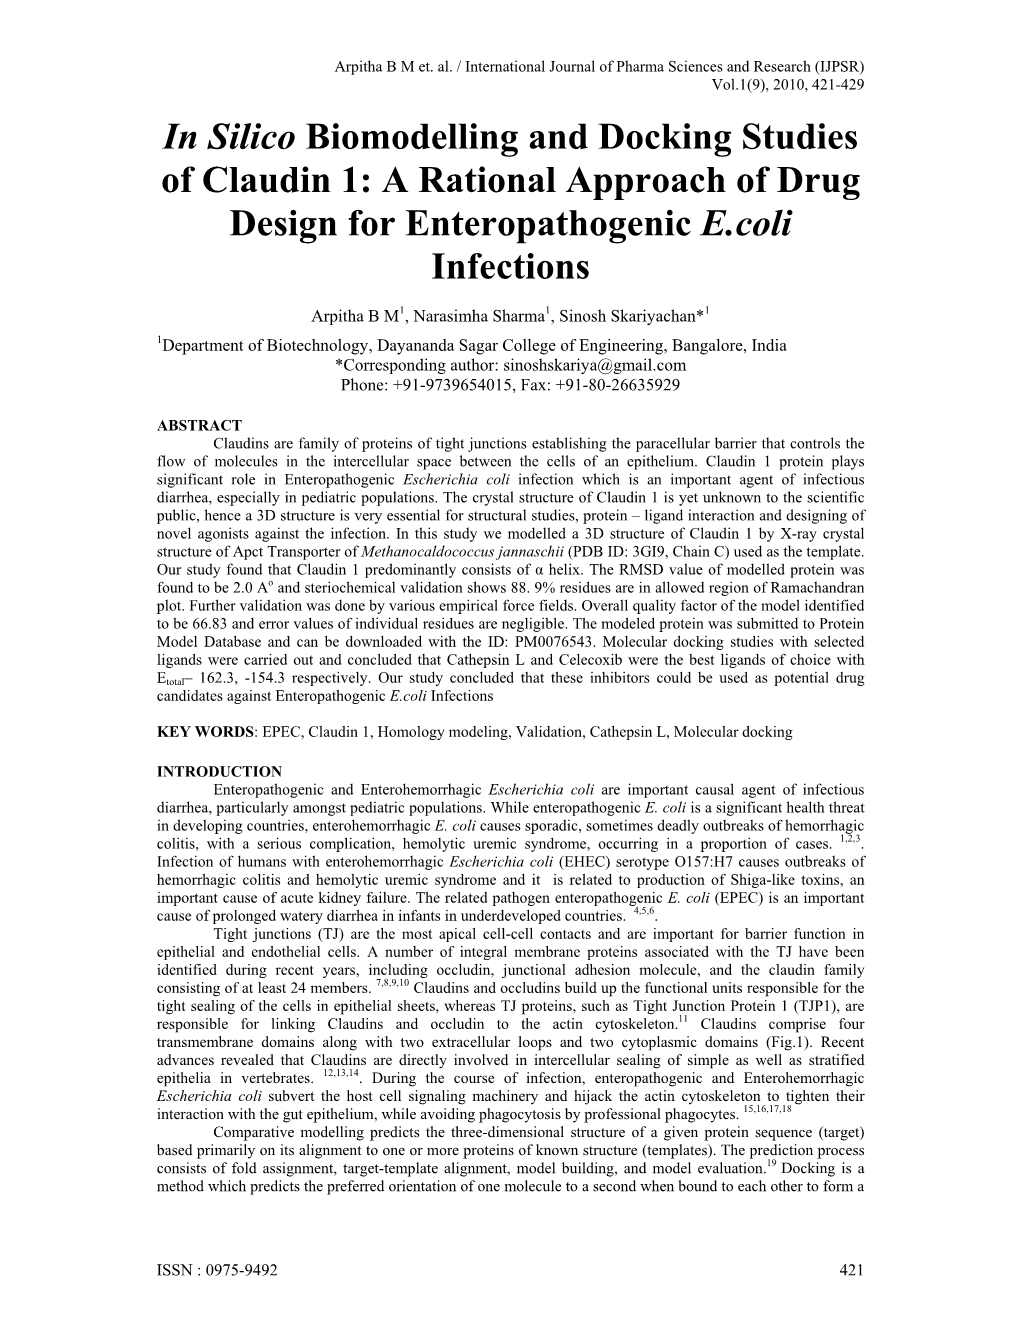 In Silico Biomodelling and Docking Studies of Claudin 1: a Rational Approach of Drug Design for Enteropathogenic E.Coli Infections